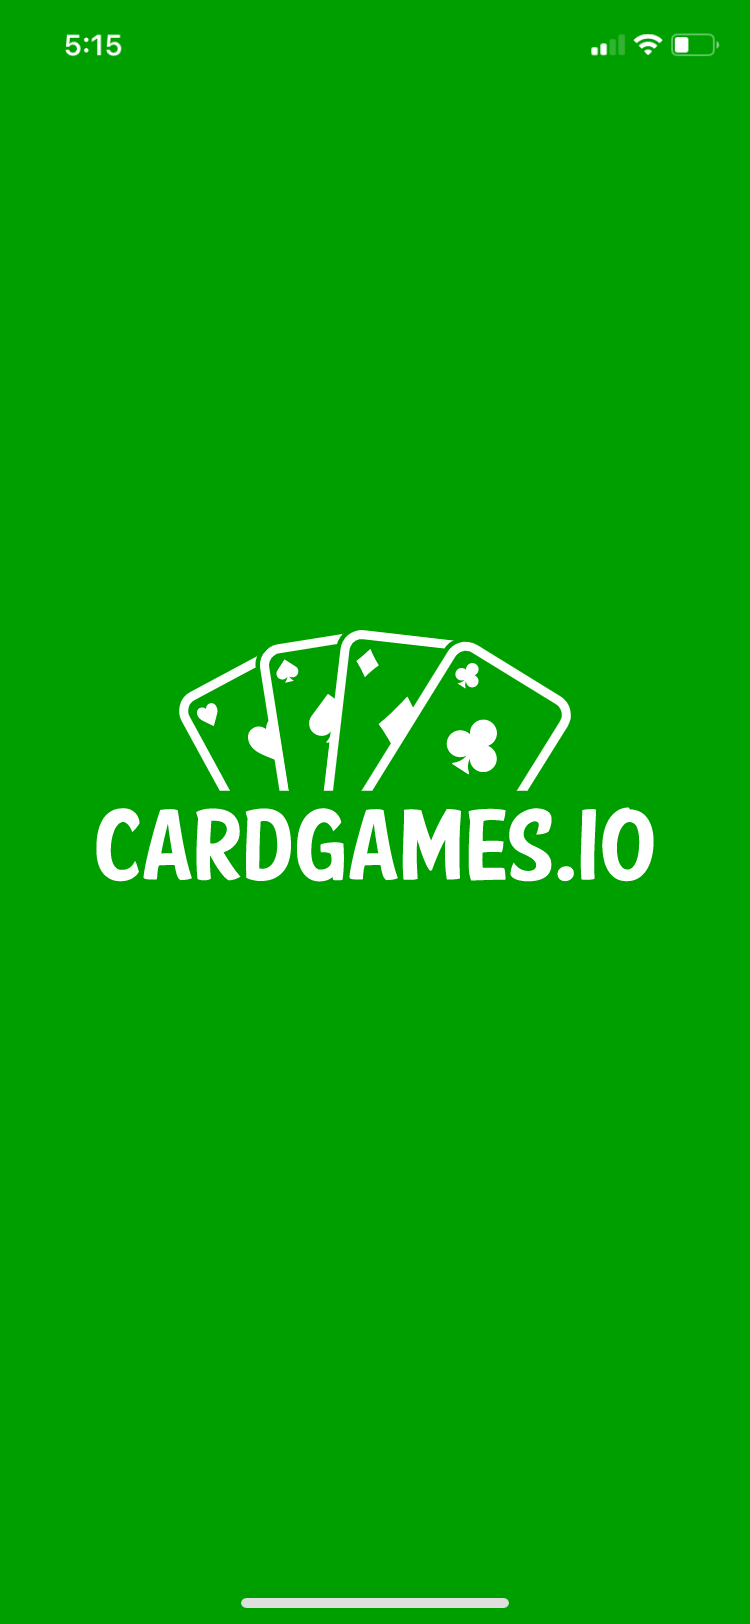 Cardgames startup page